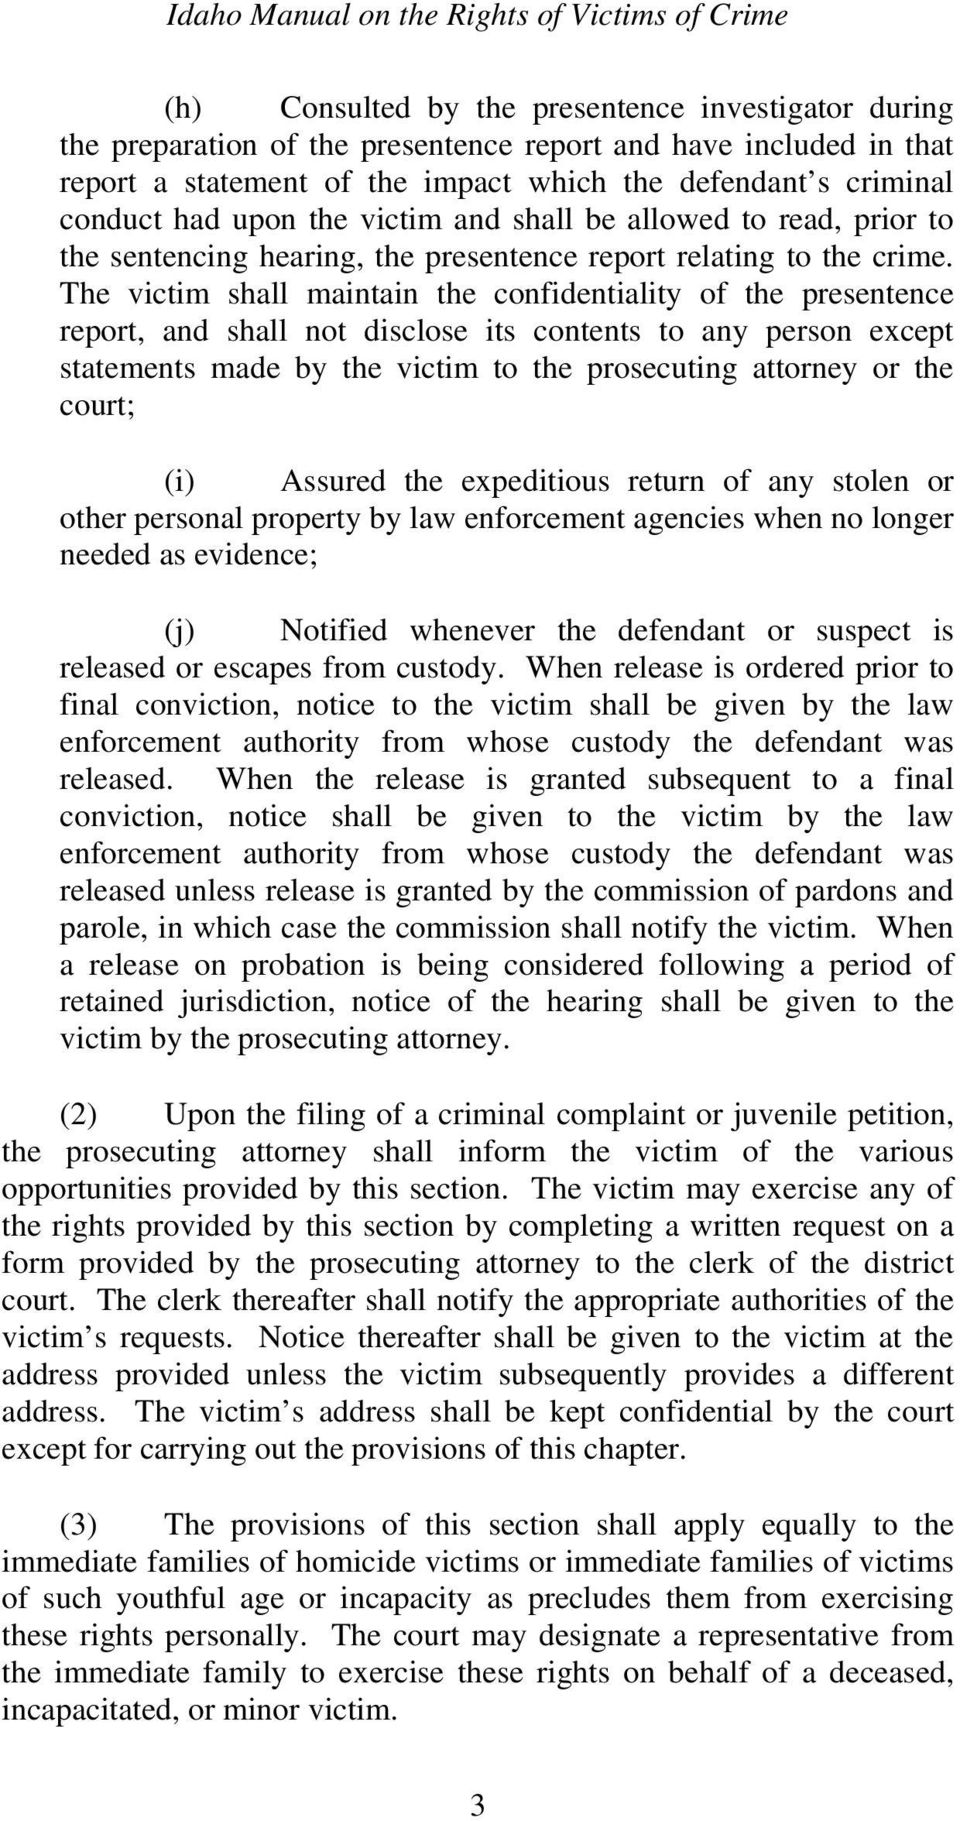 The victim shall maintain the confidentiality of the presentence report, and shall not disclose its contents to any person except statements made by the victim to the prosecuting attorney or the